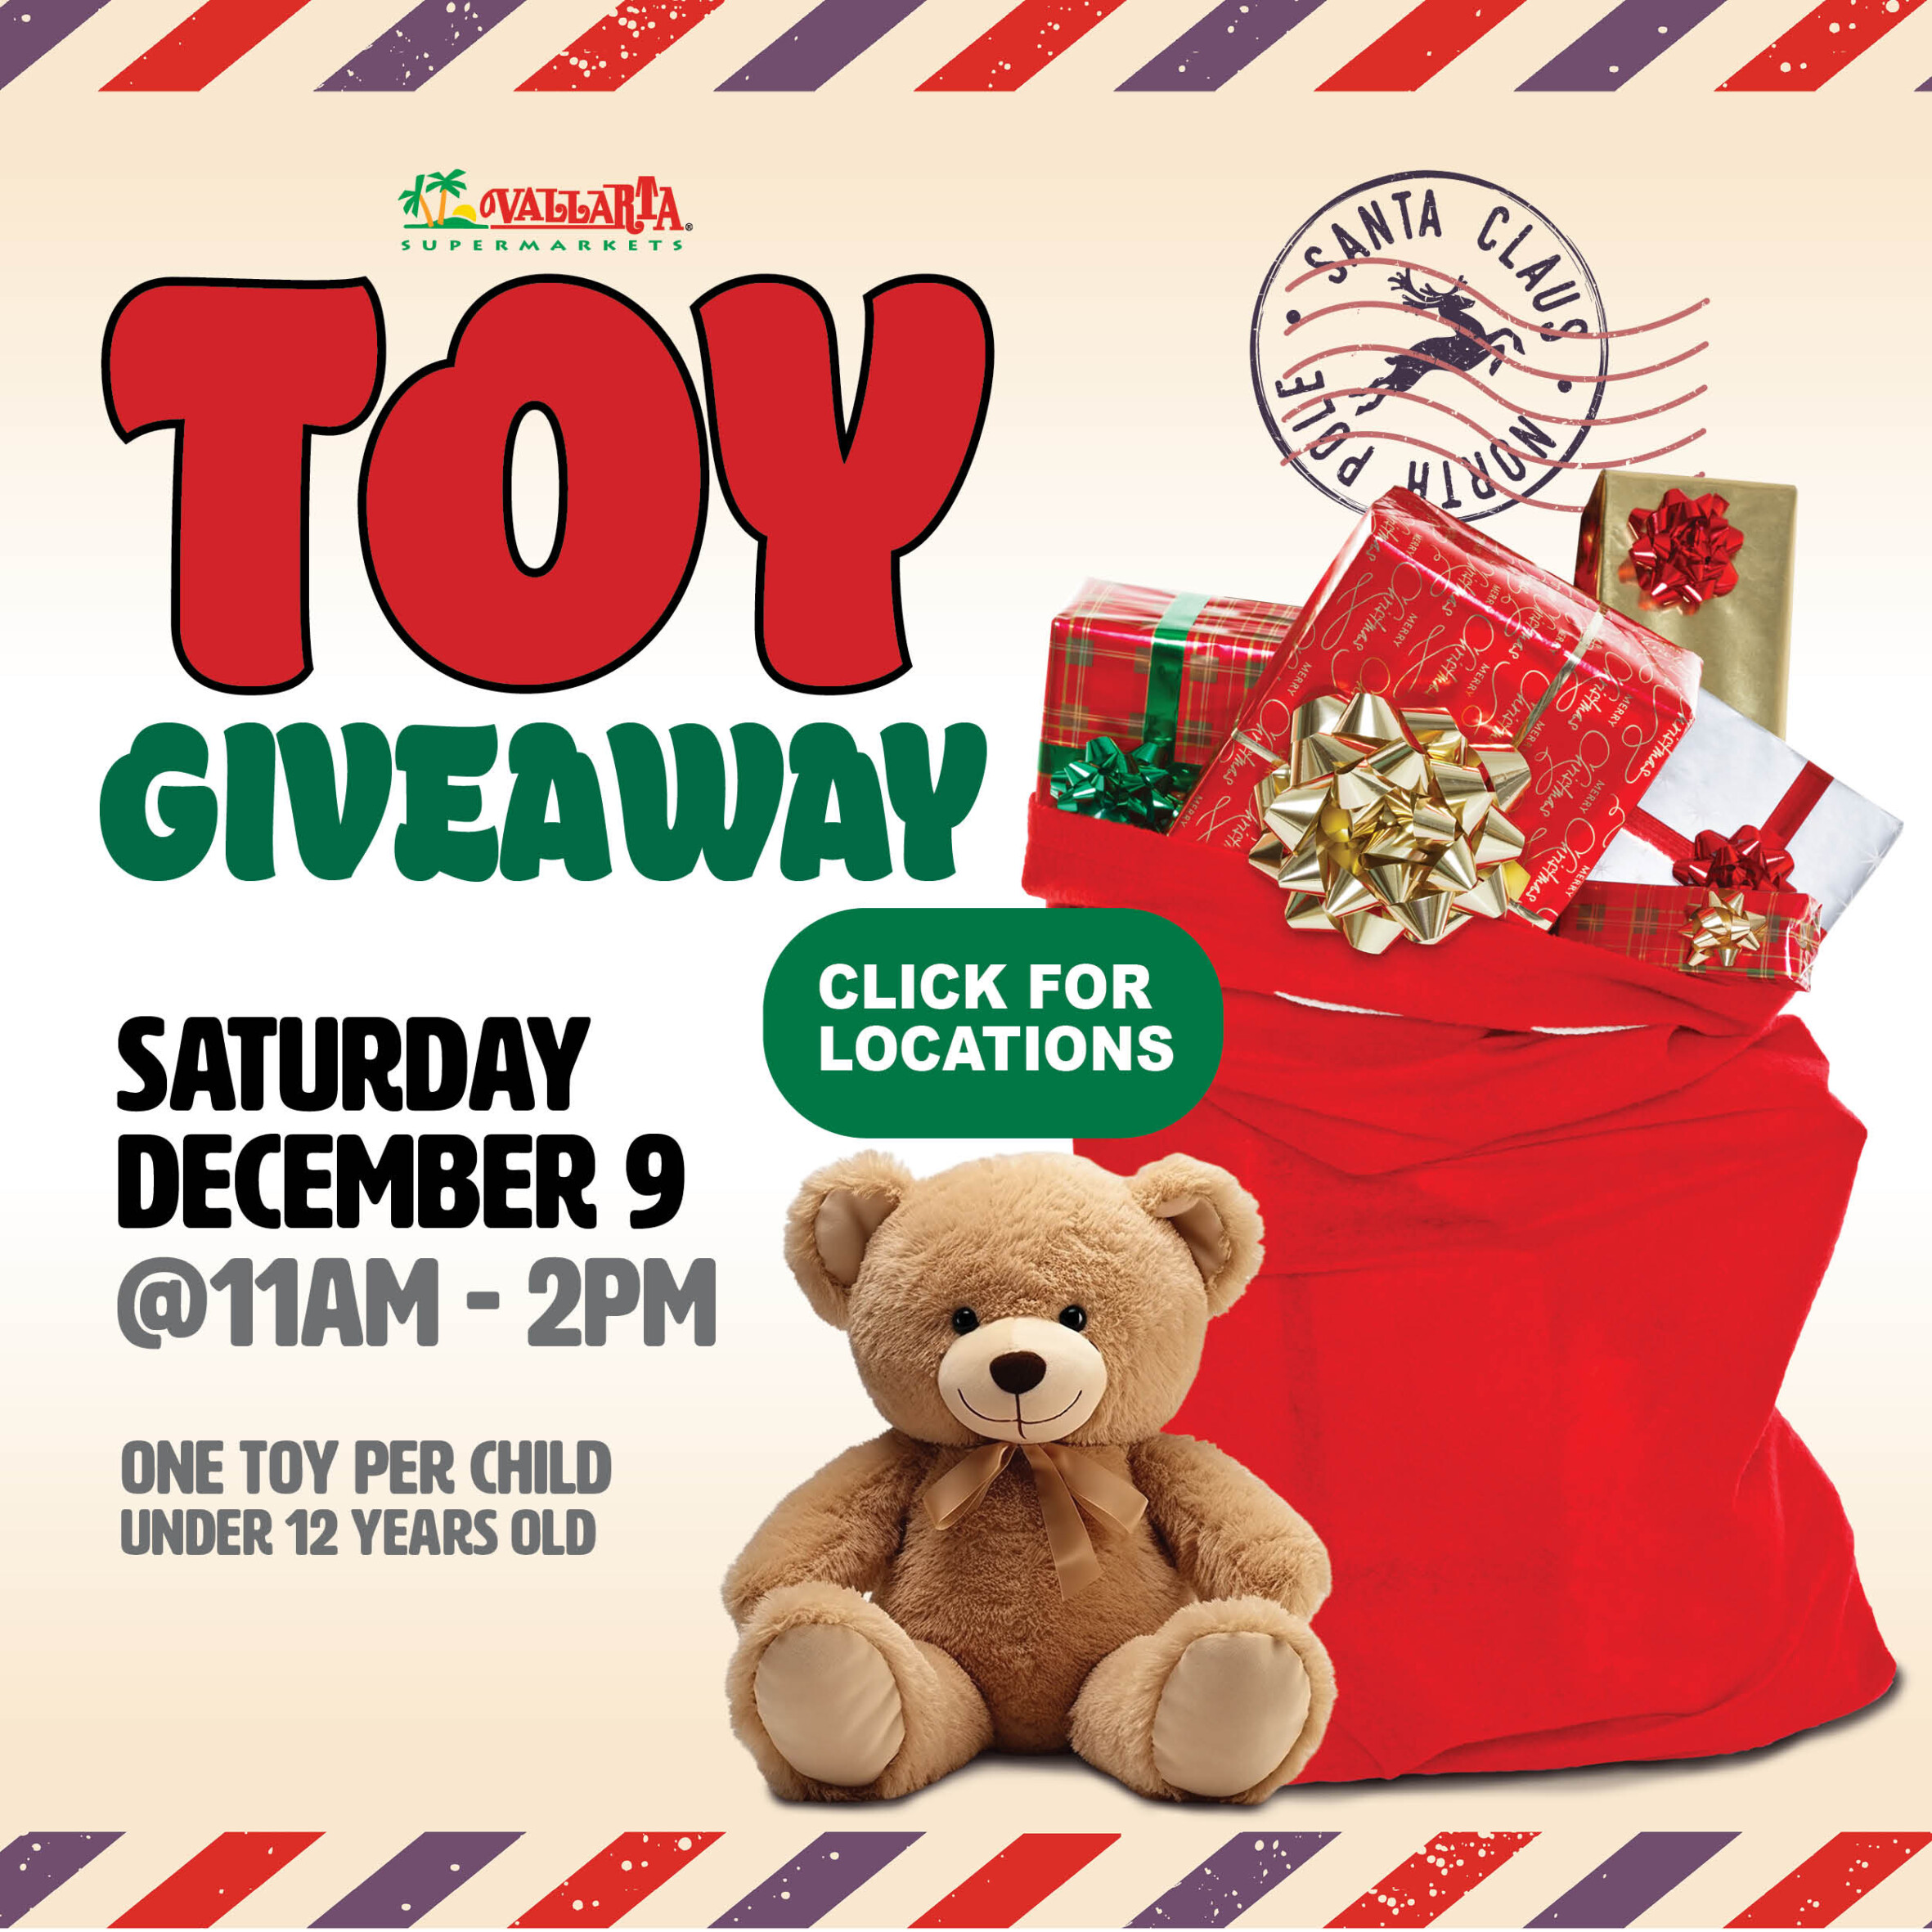 Toy Contests: Enter this 2020 30-day Toy Giveaway